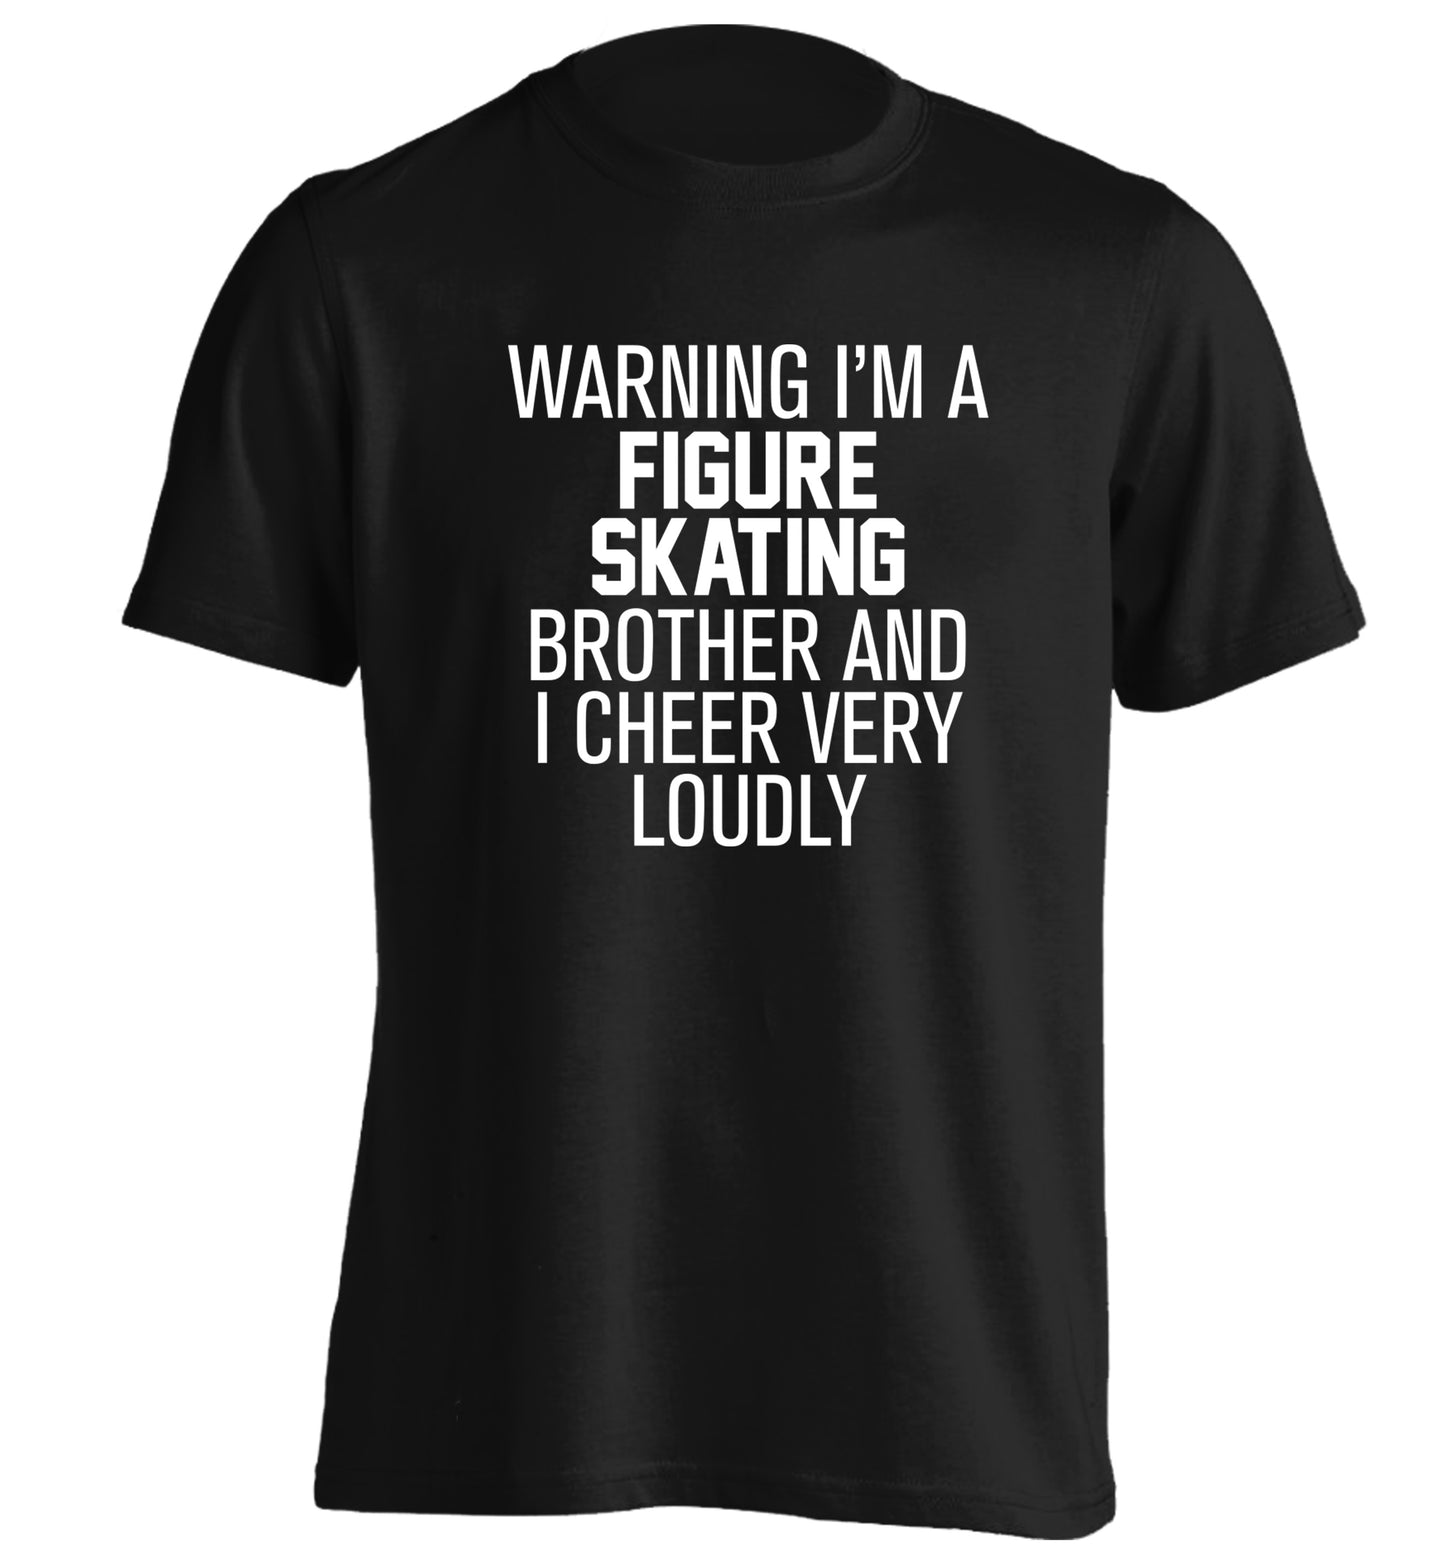 Warning I'm a figure skating brother and I cheer very loudly adults unisexblack Tshirt 2XL